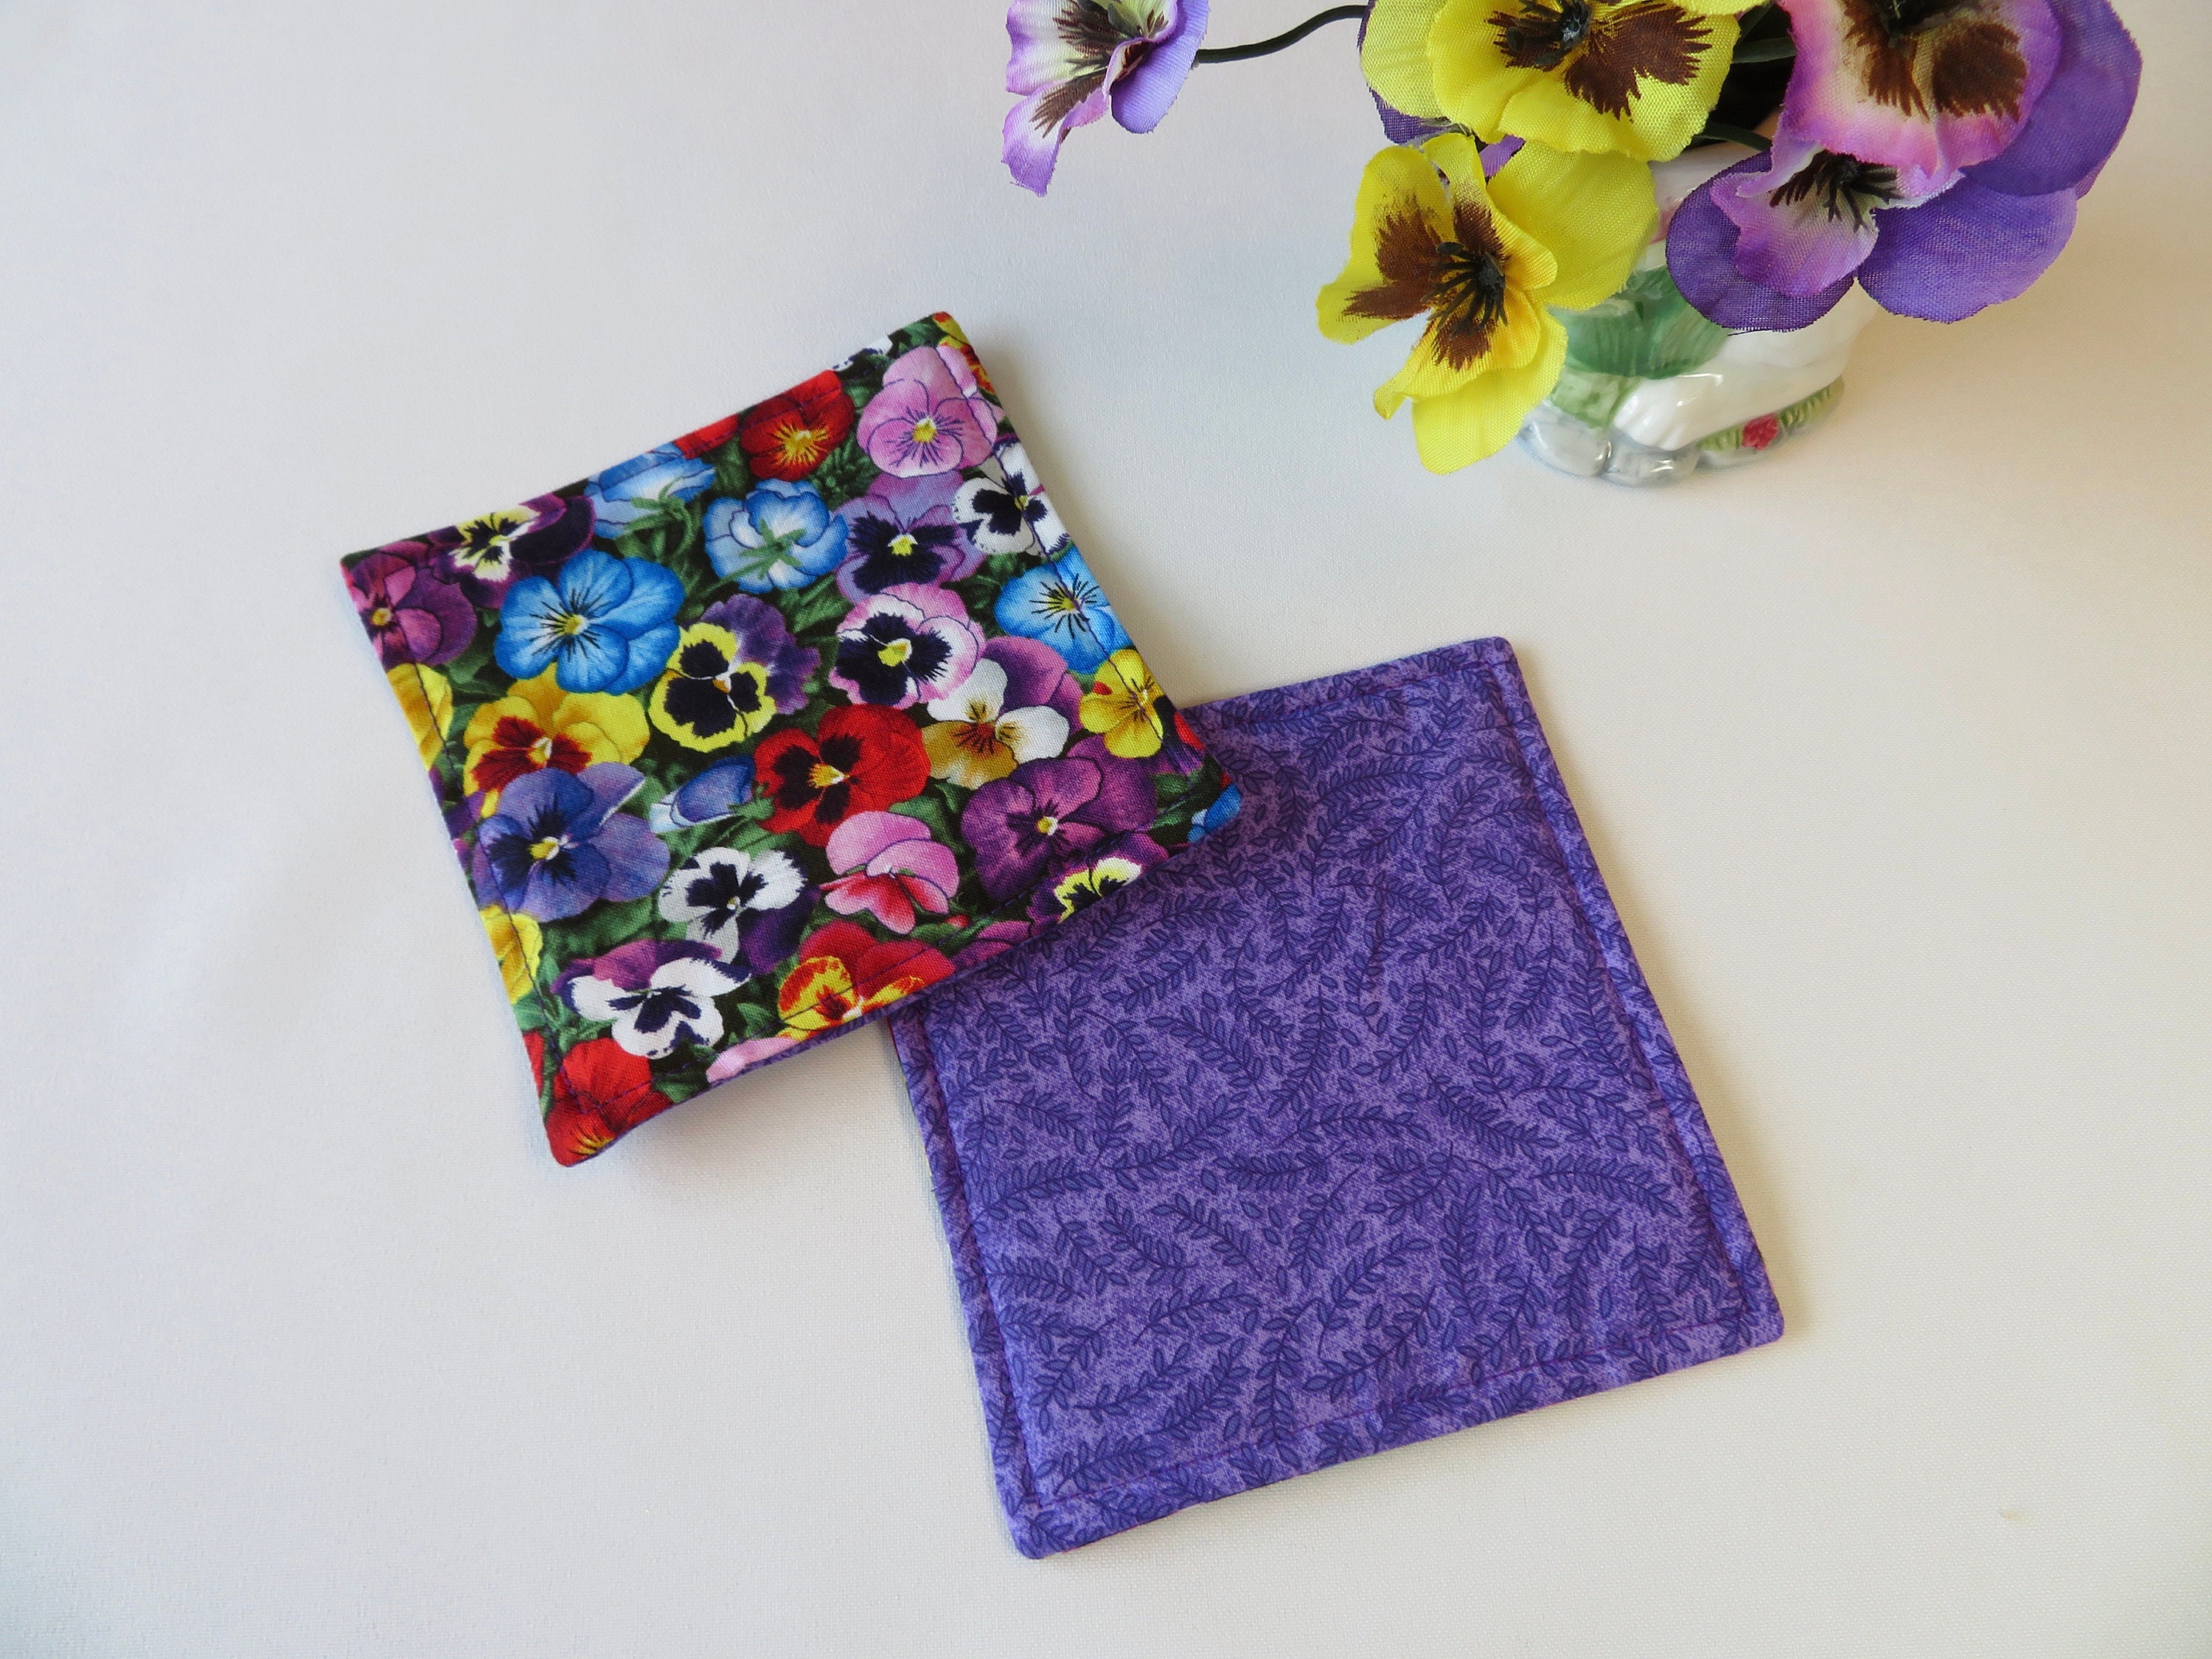 READY TO SHIP! 6 Piece Drink Coasters Purple and Yellow Pansies